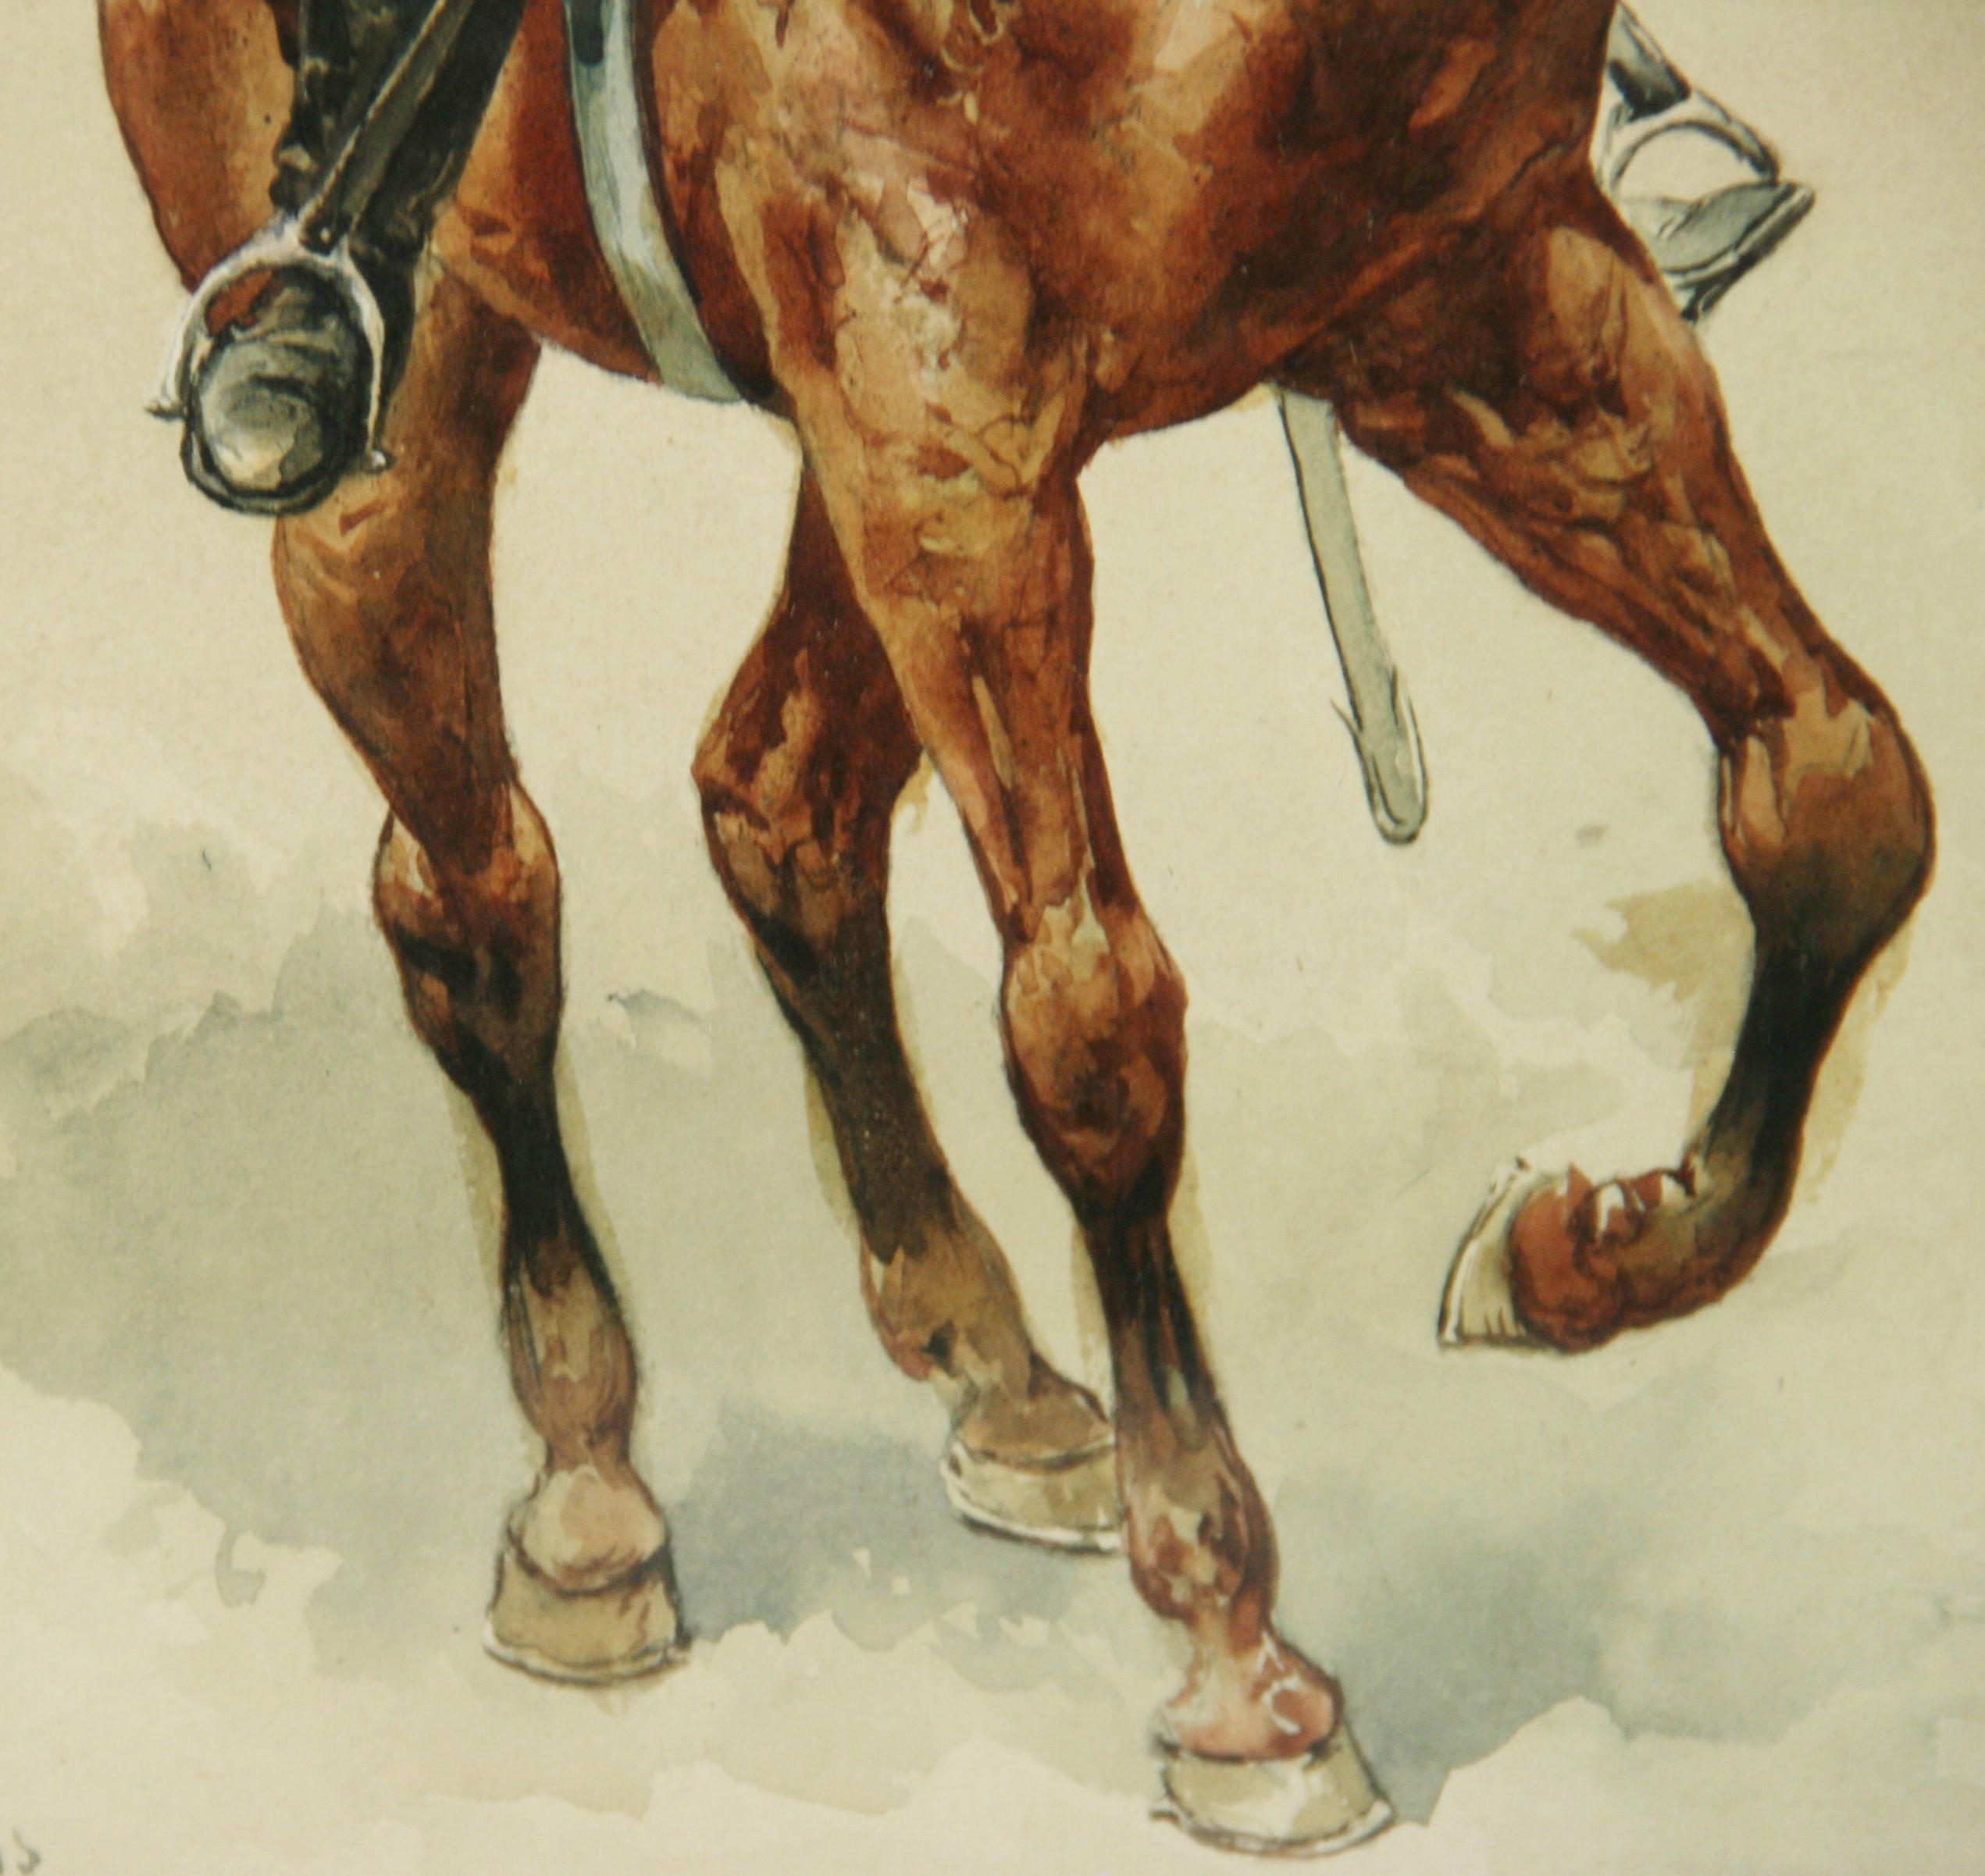 3888 French Soldier equestrian painting on paper under glass
Image size 11.5x6.75